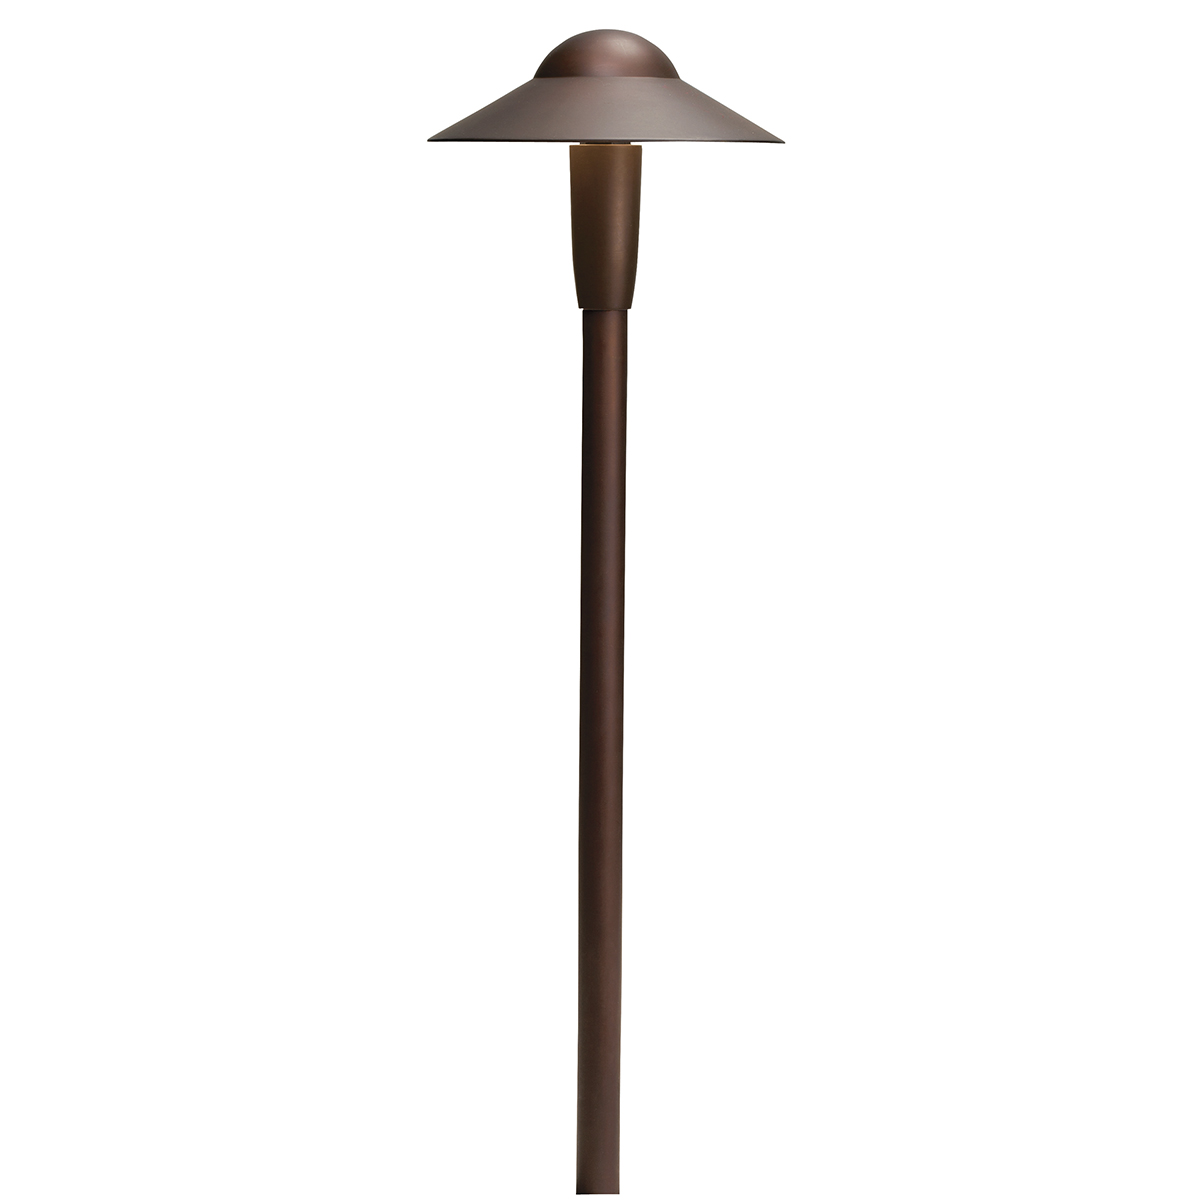 Kichler 15870AZT30R LED 6 Dome Path Light in Textured Architectural Bronze